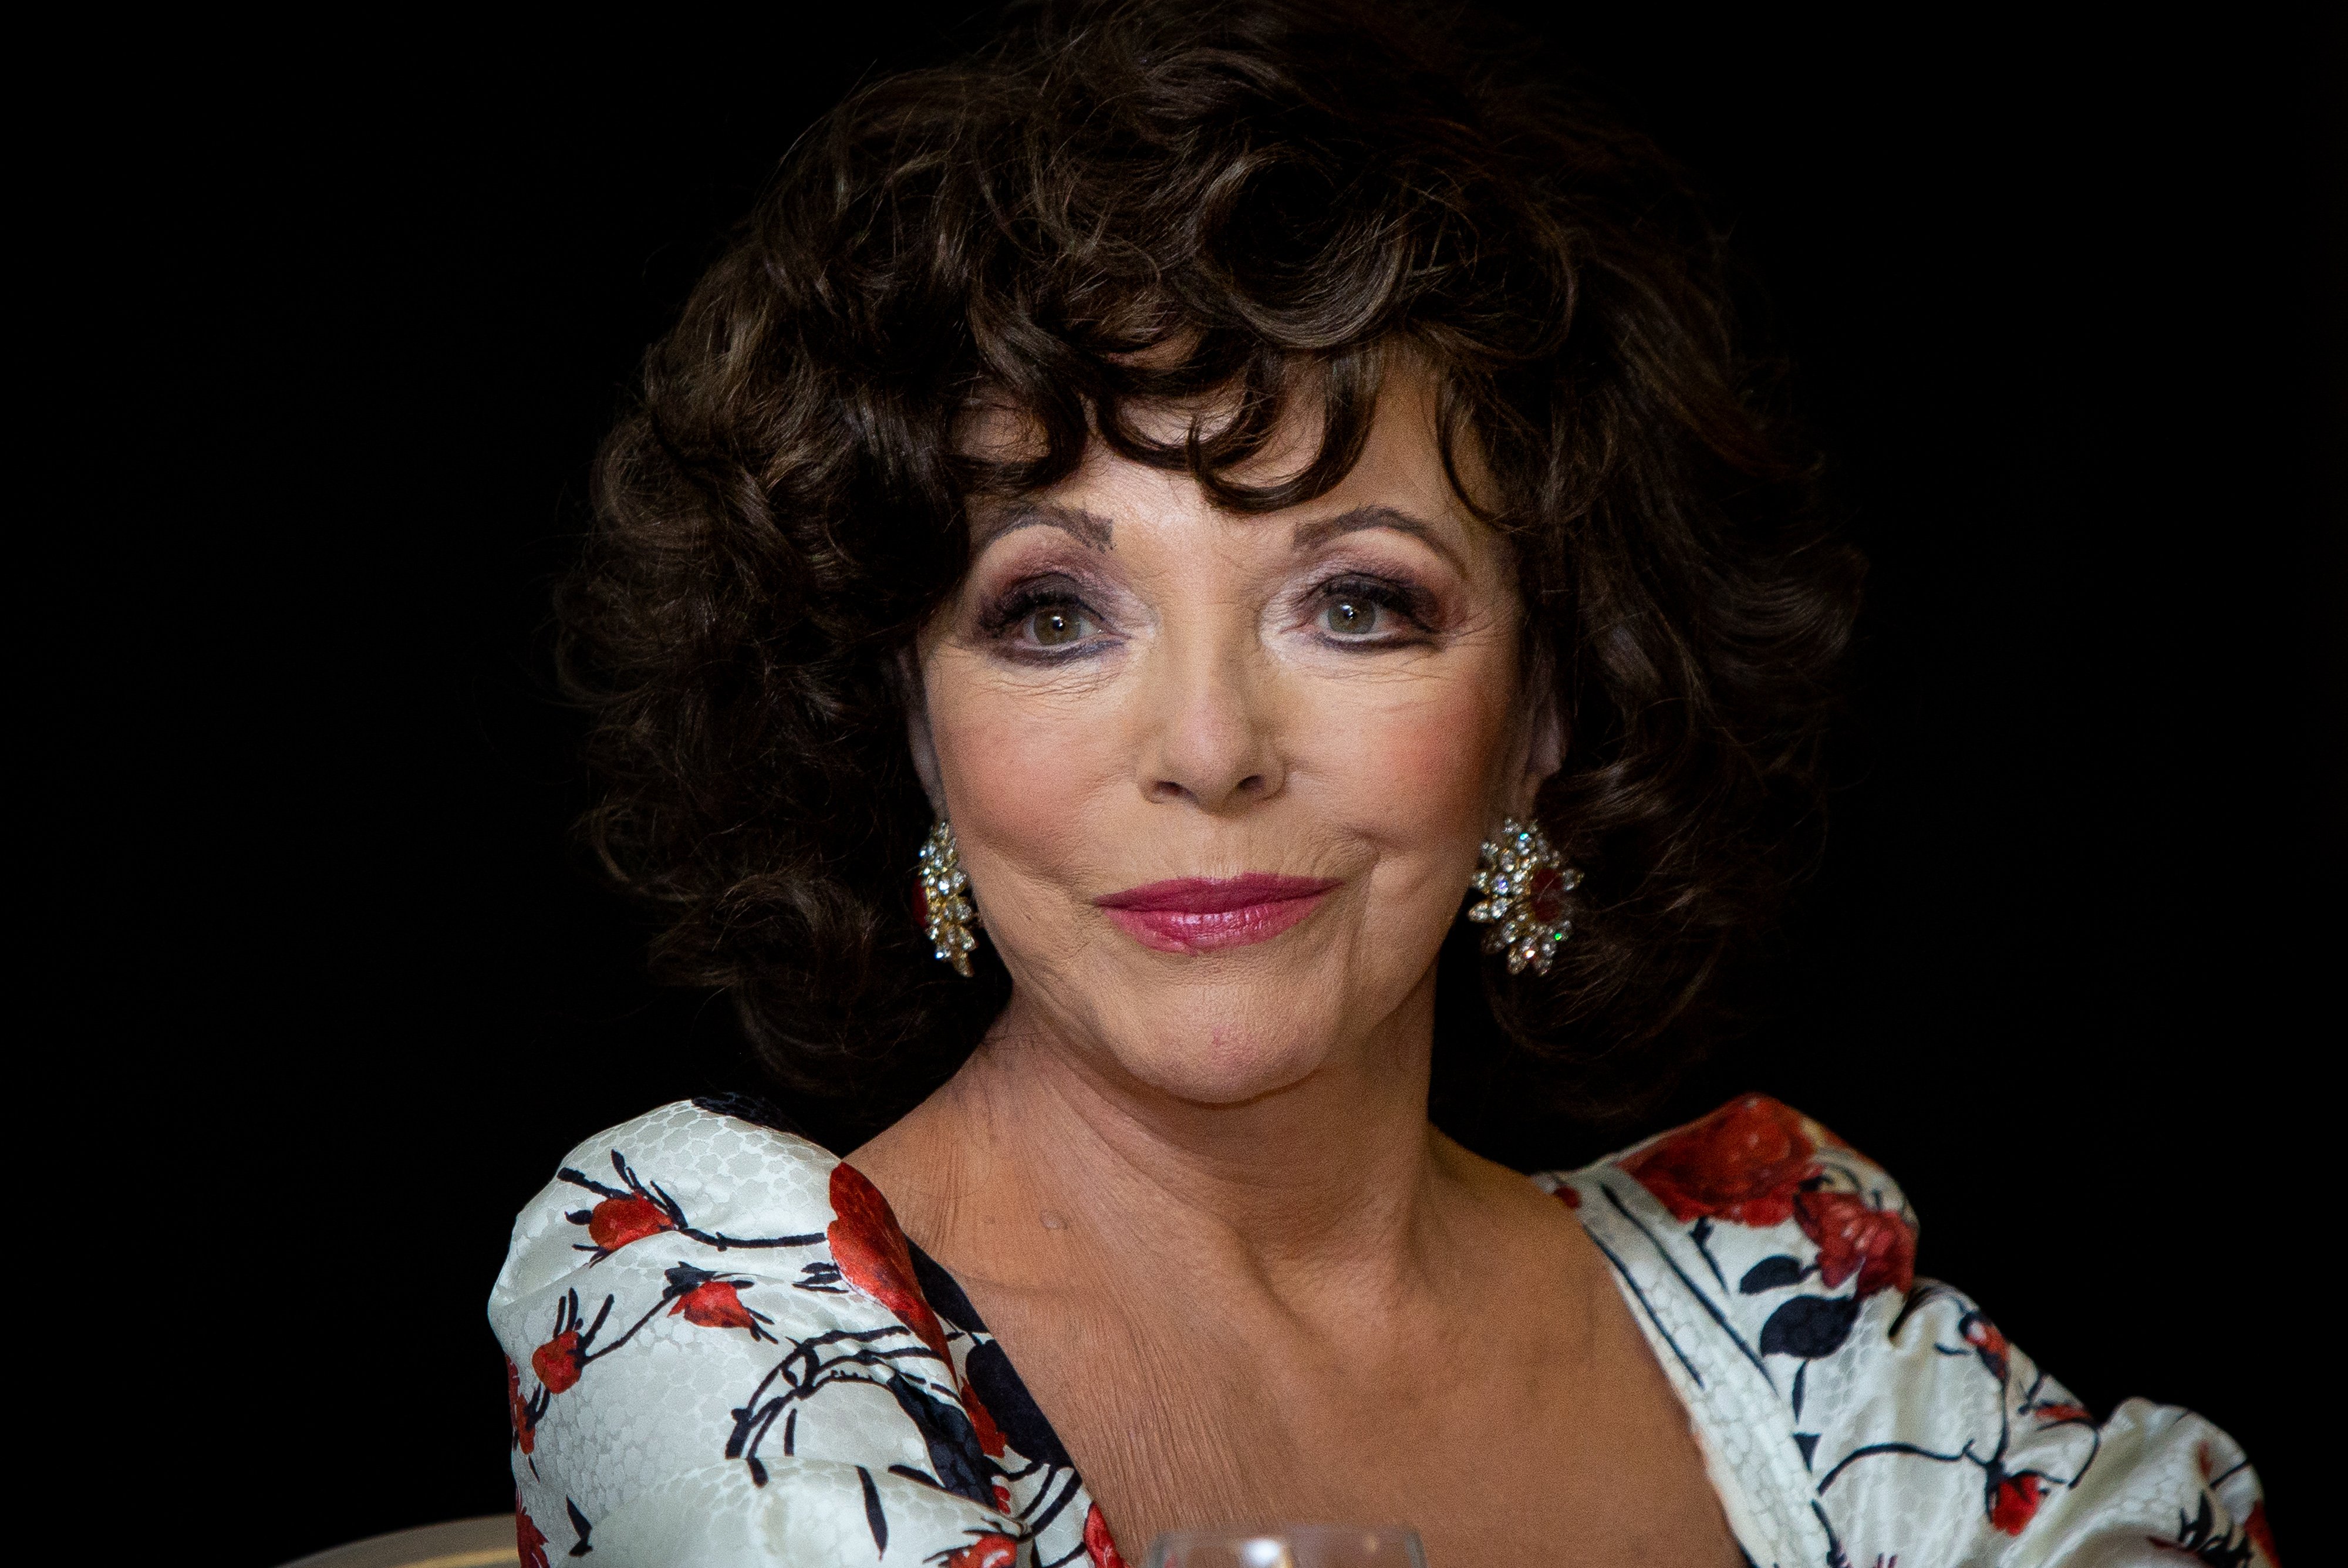 Joan Collins im Westin Palace Hotel am 26. Oktober 2020 in Madrid, Spanien. | Quelle: Getty Images